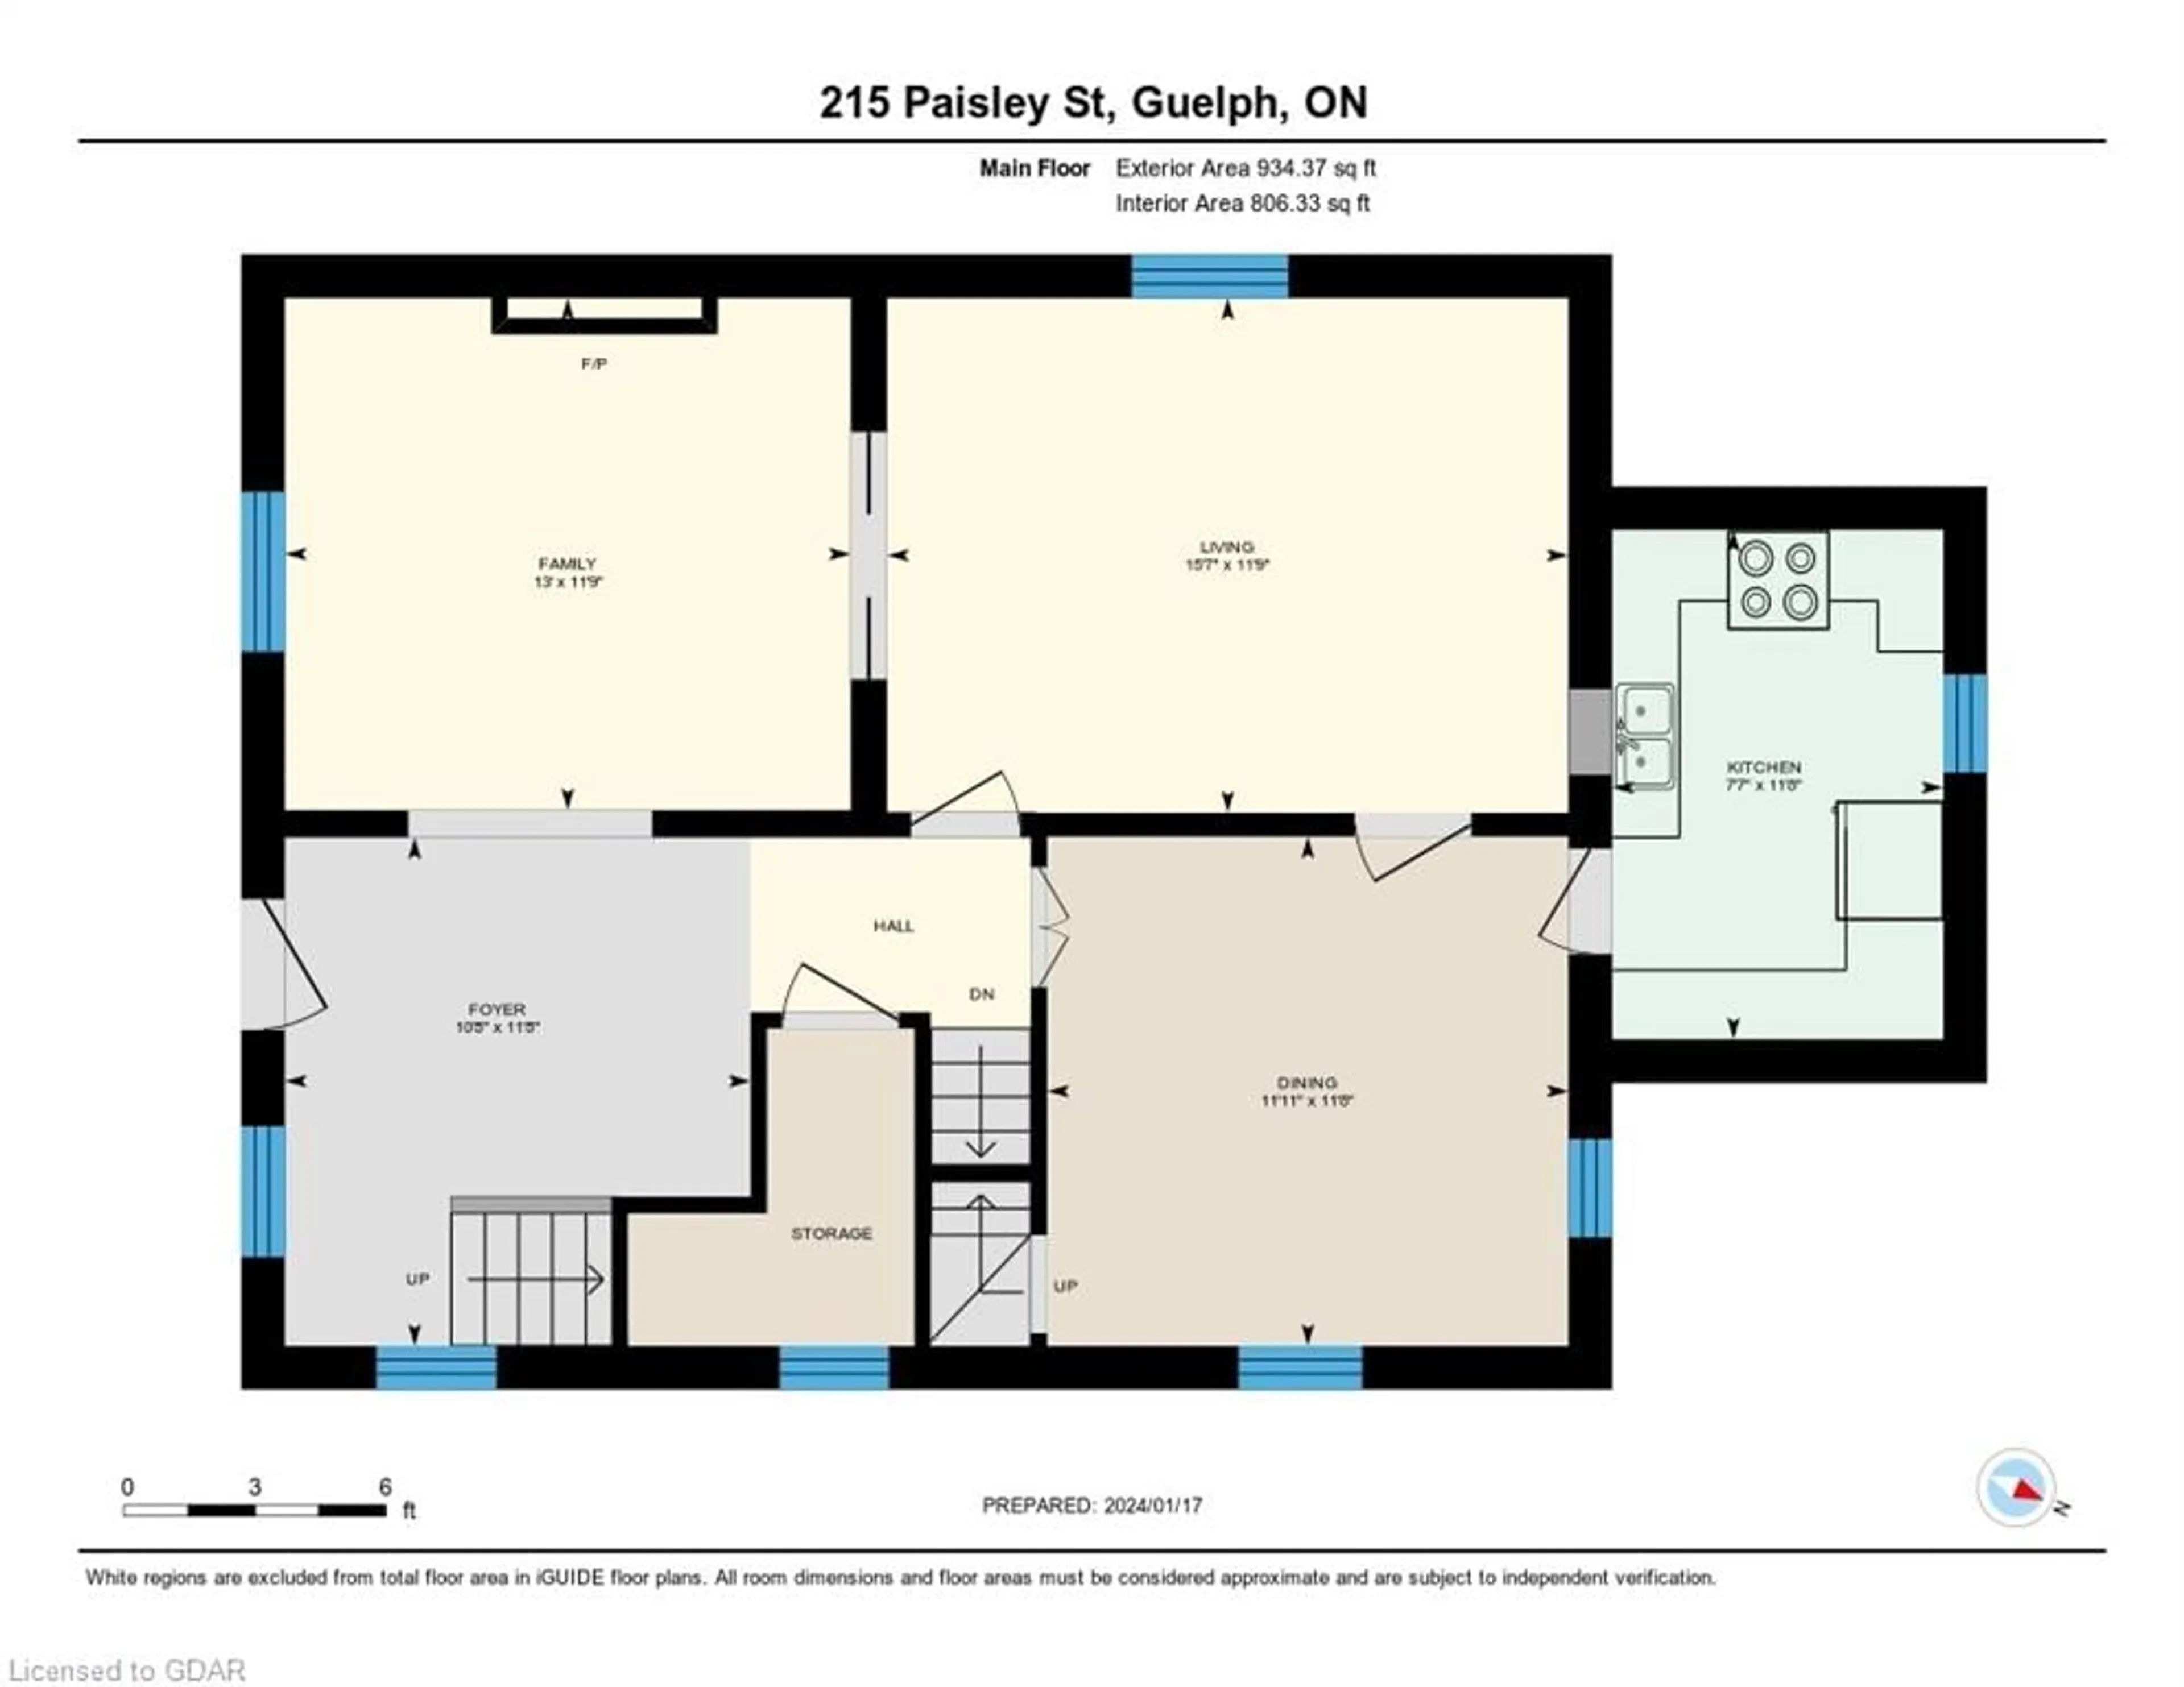 Floor plan for 215 Paisley St, Guelph Ontario N1H 2P5